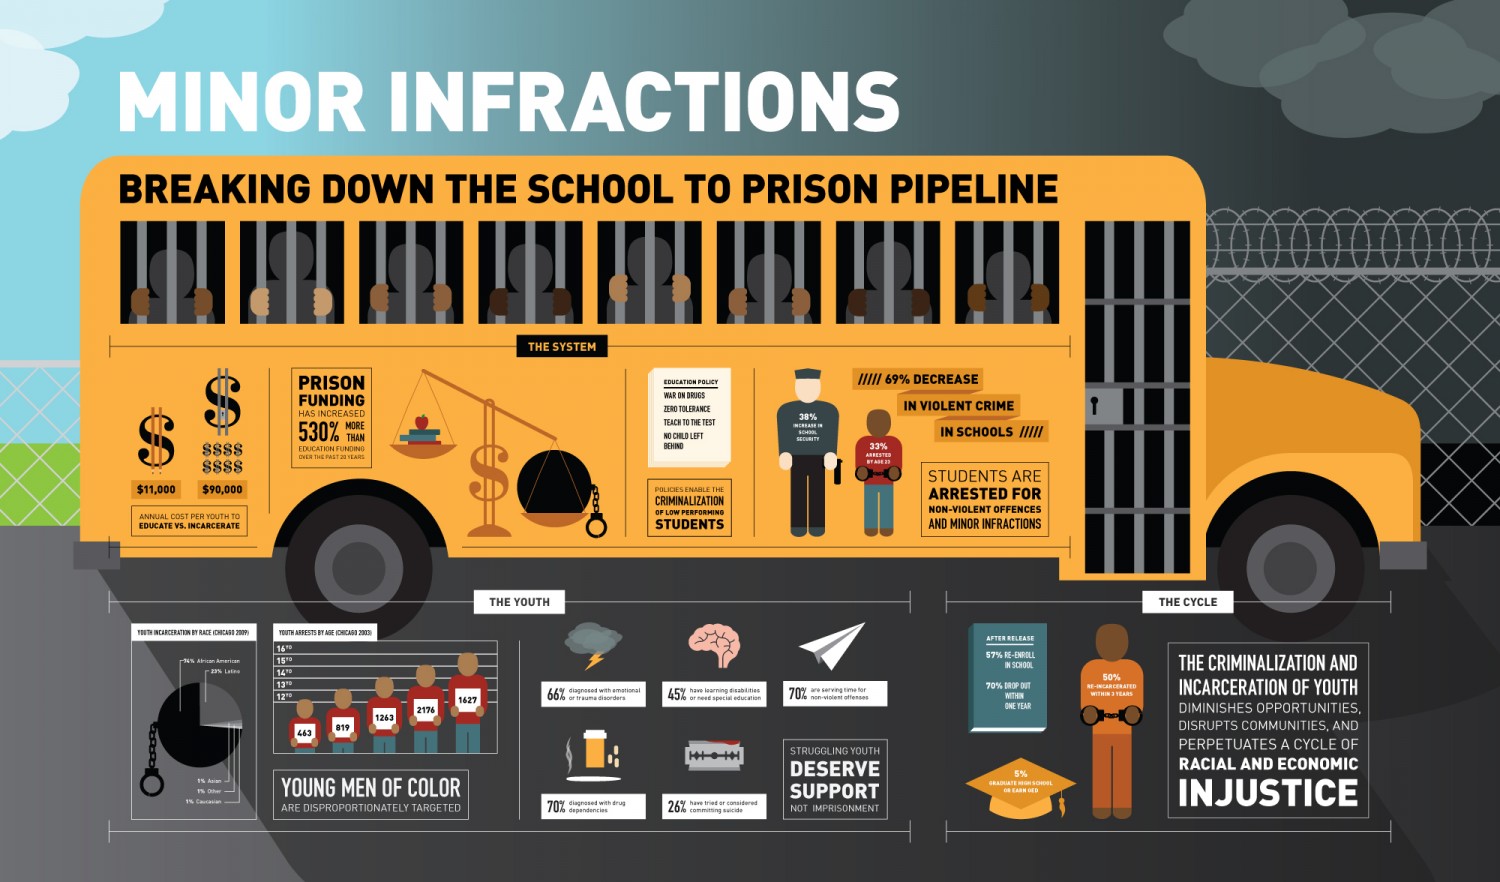 A graphic breaking down how minor infractions contribute to the school-to-prison pipeline